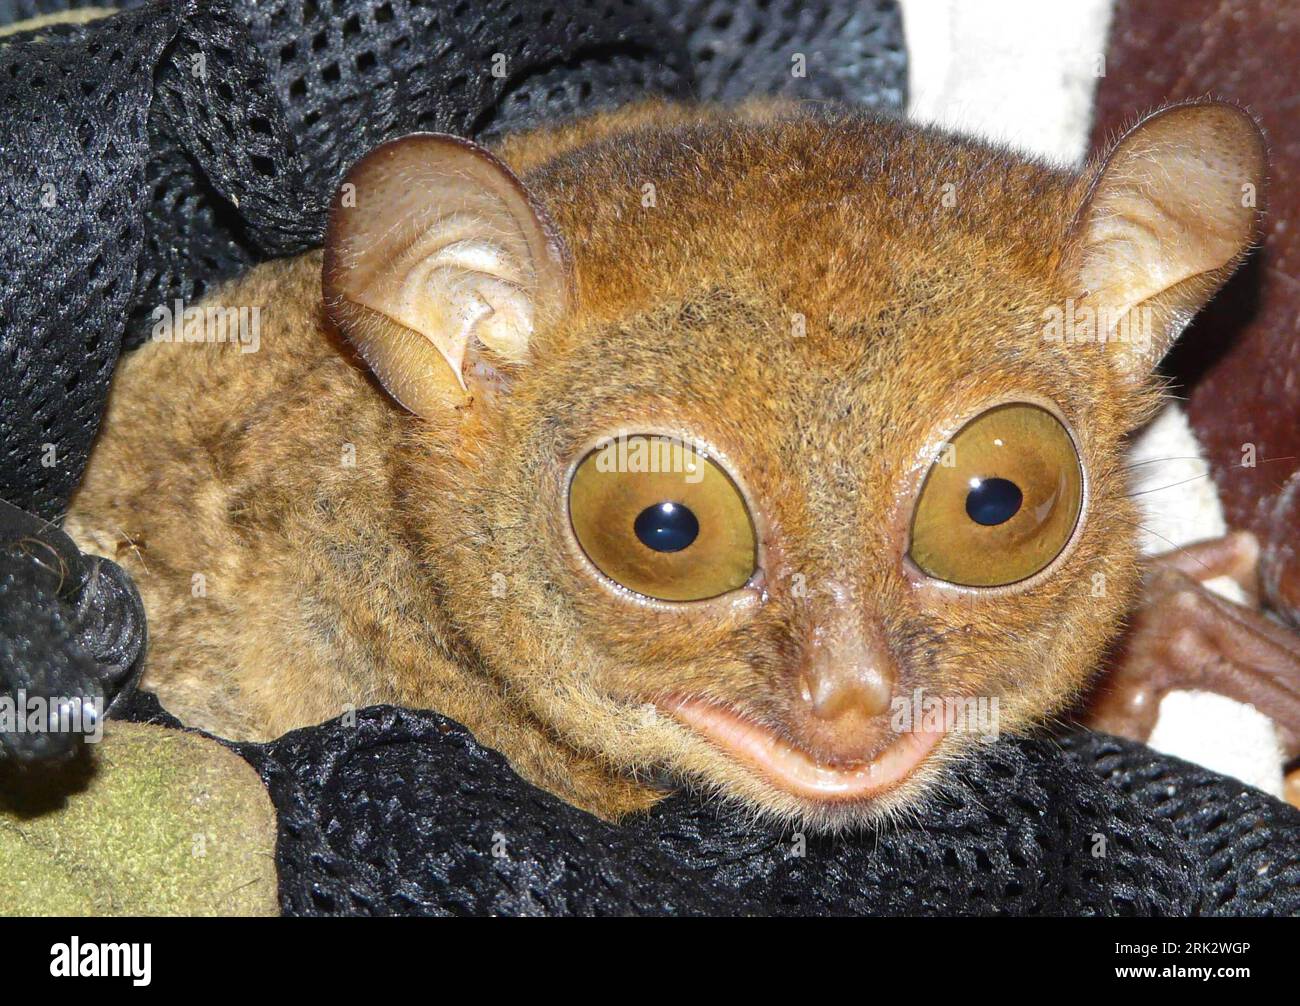 Bildnummer: 53256038  Datum: 08.08.2009  Copyright: imago/Xinhua (090811) -- KINABATANGAN, Aug. 11, 2009 (Xinhua) -- A male tarsier is seen at a research center of wild animals in Kinabatangan of Sabah State, east Malaysia, Aug. 8, 2009. Tarsiers, which are 85 to 160 millimeters long and weigh 80 to 165 grams, are one of the smallest and rarest primates in the world. (Xinhua) (gj) (2)MALAYSIA-KINABATANGAN-TARSIER  PUBLICATIONxNOTxINxCHN  premiumd Tiere Tarsier Affe kbdig xdp  2009 quer  Koboldmaki    Bildnummer 53256038 Date 08 08 2009 Copyright Imago XINHUA  Kinabatangan Aug 11 2009 XINHUA a Stock Photo